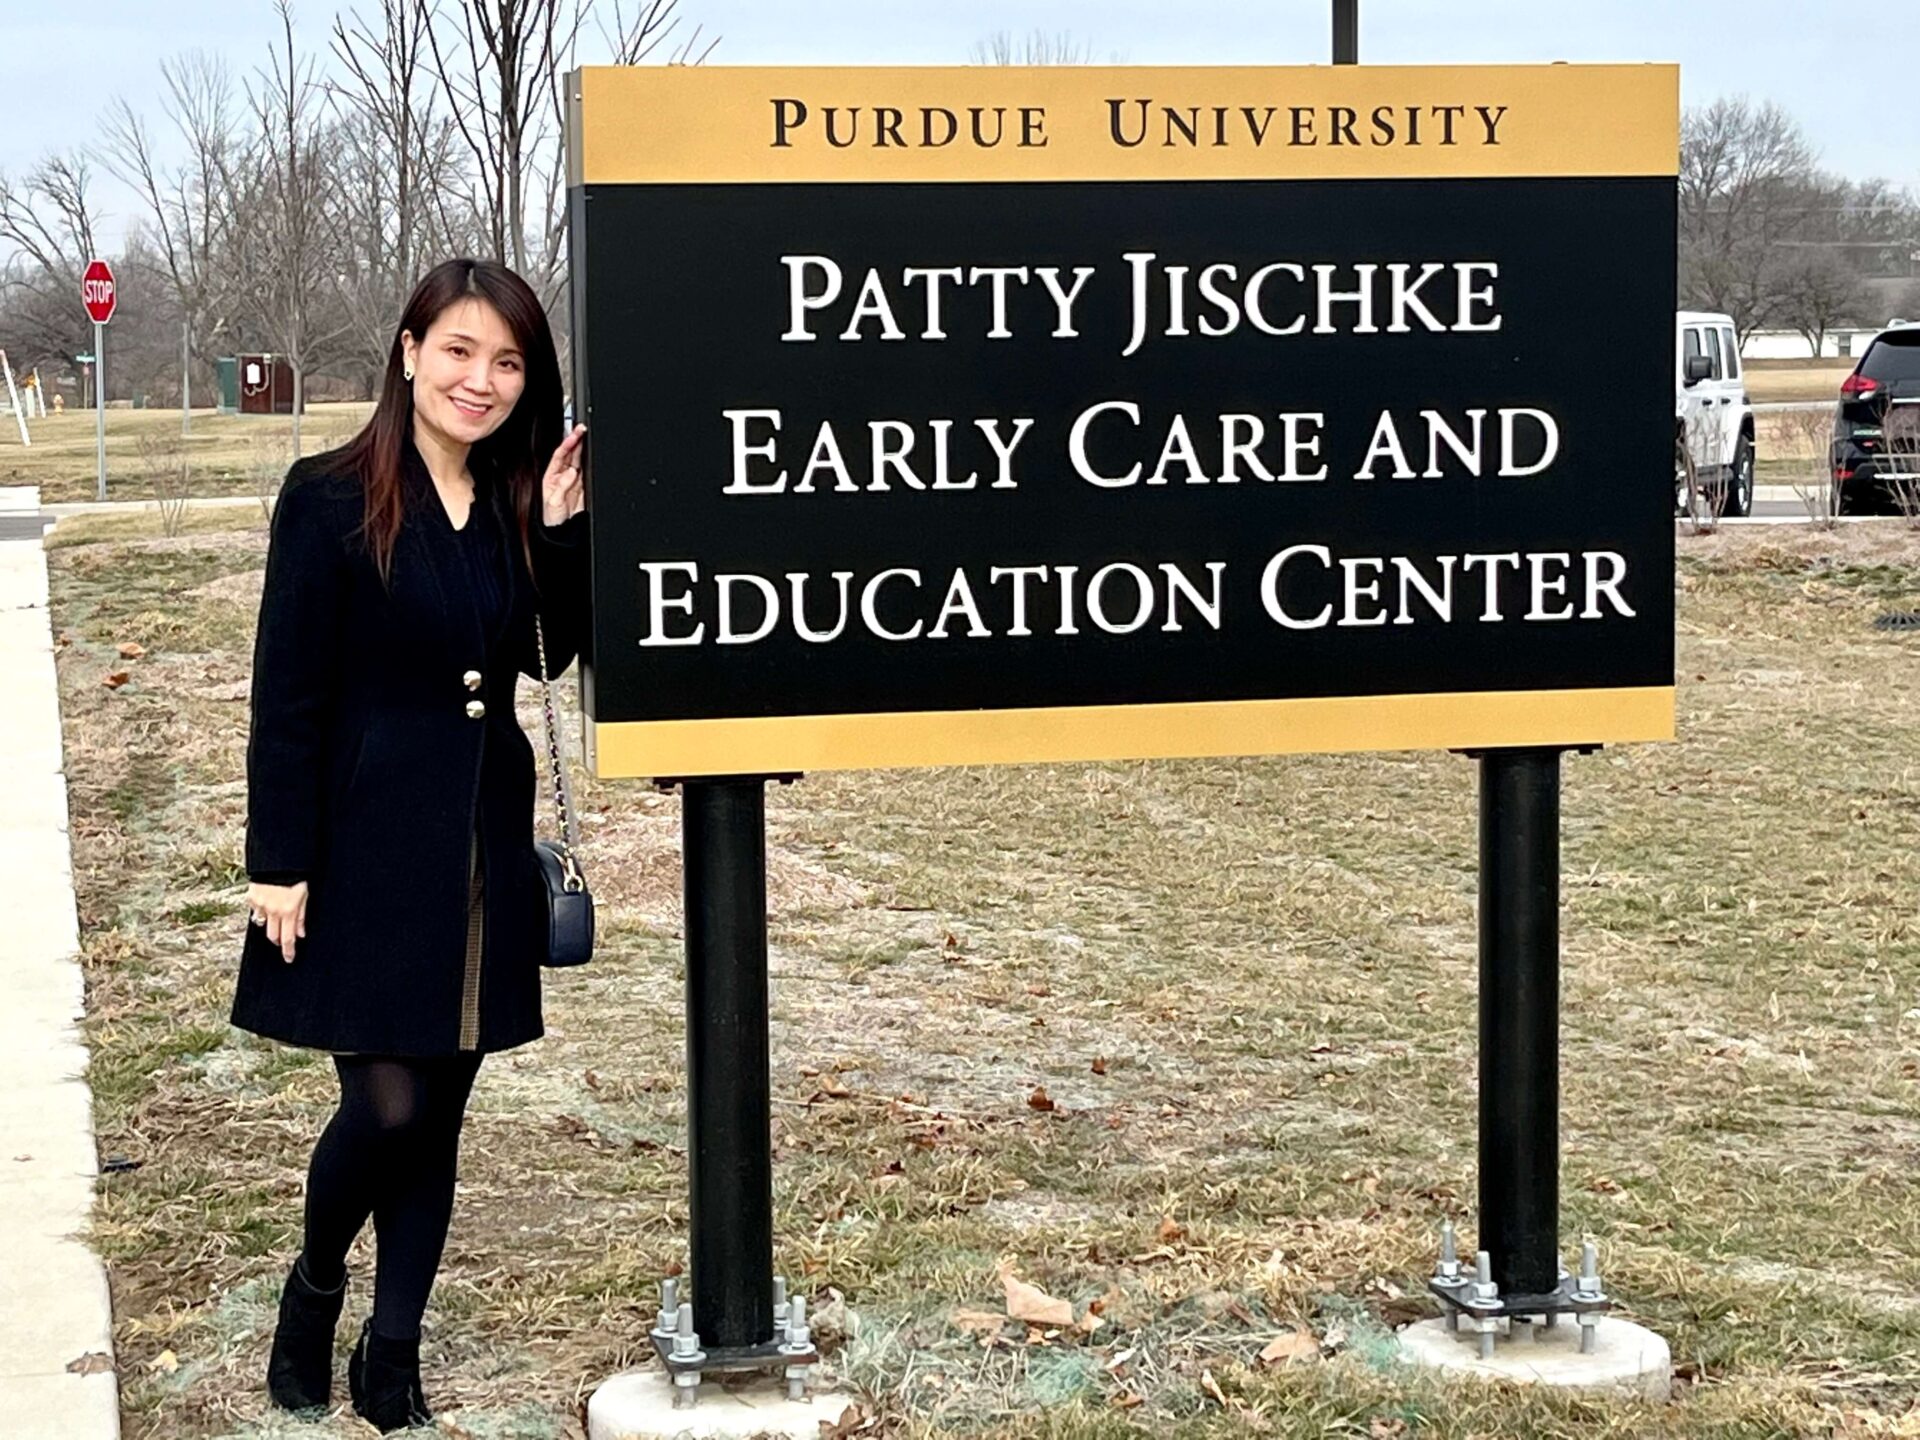 Patty Jischke’s legacy as the First Lady of Purdue is an inspiration to Dr. Hui as she also seeks to enrich the lives of children through impactful contributions such as the Patty Jiscke Early Care and Education Center.​